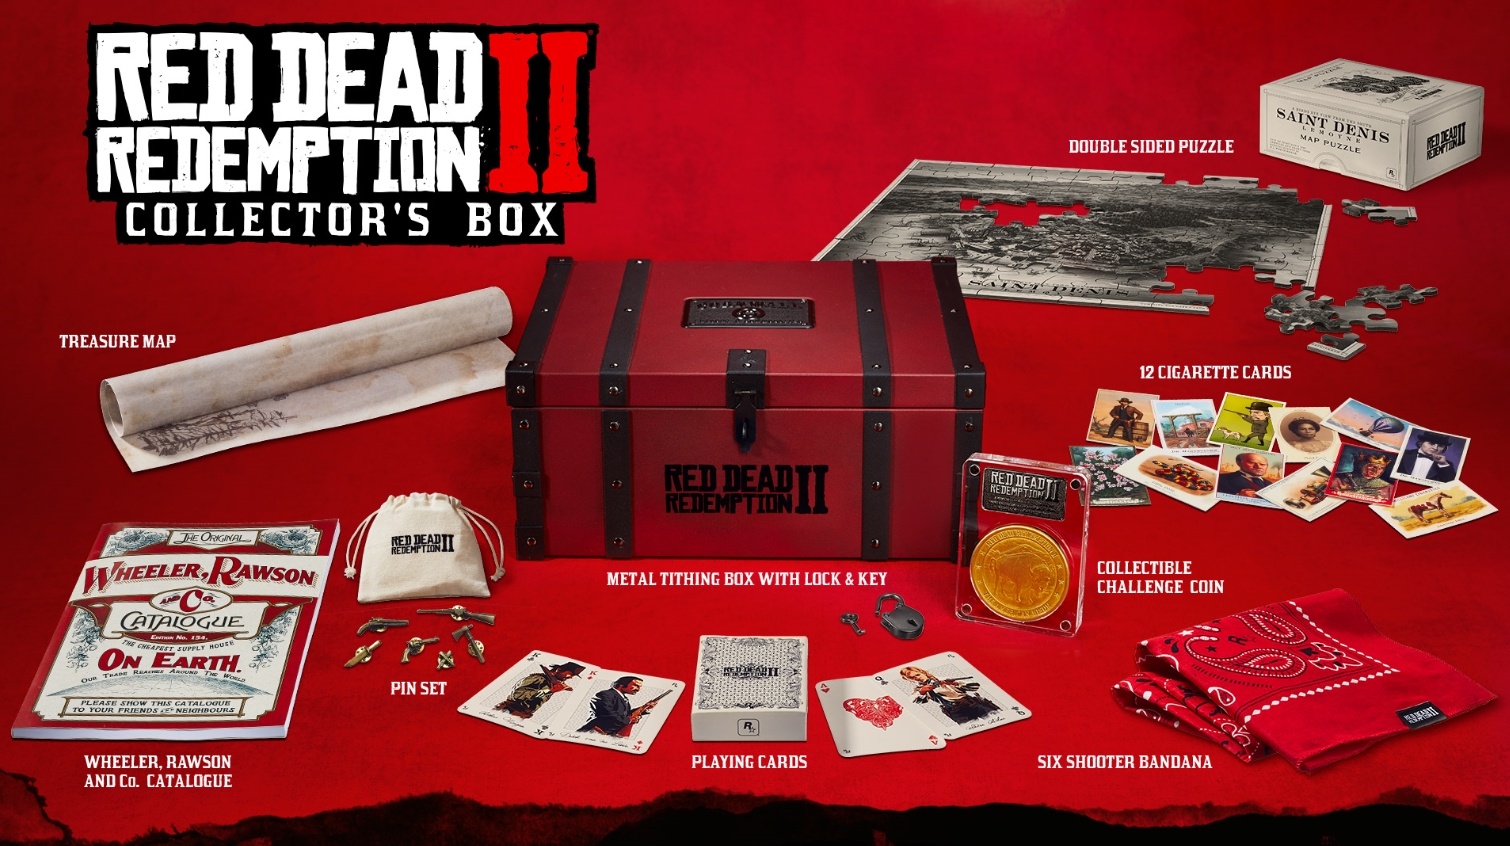 Red Dead Redemption 2 Collector's Box